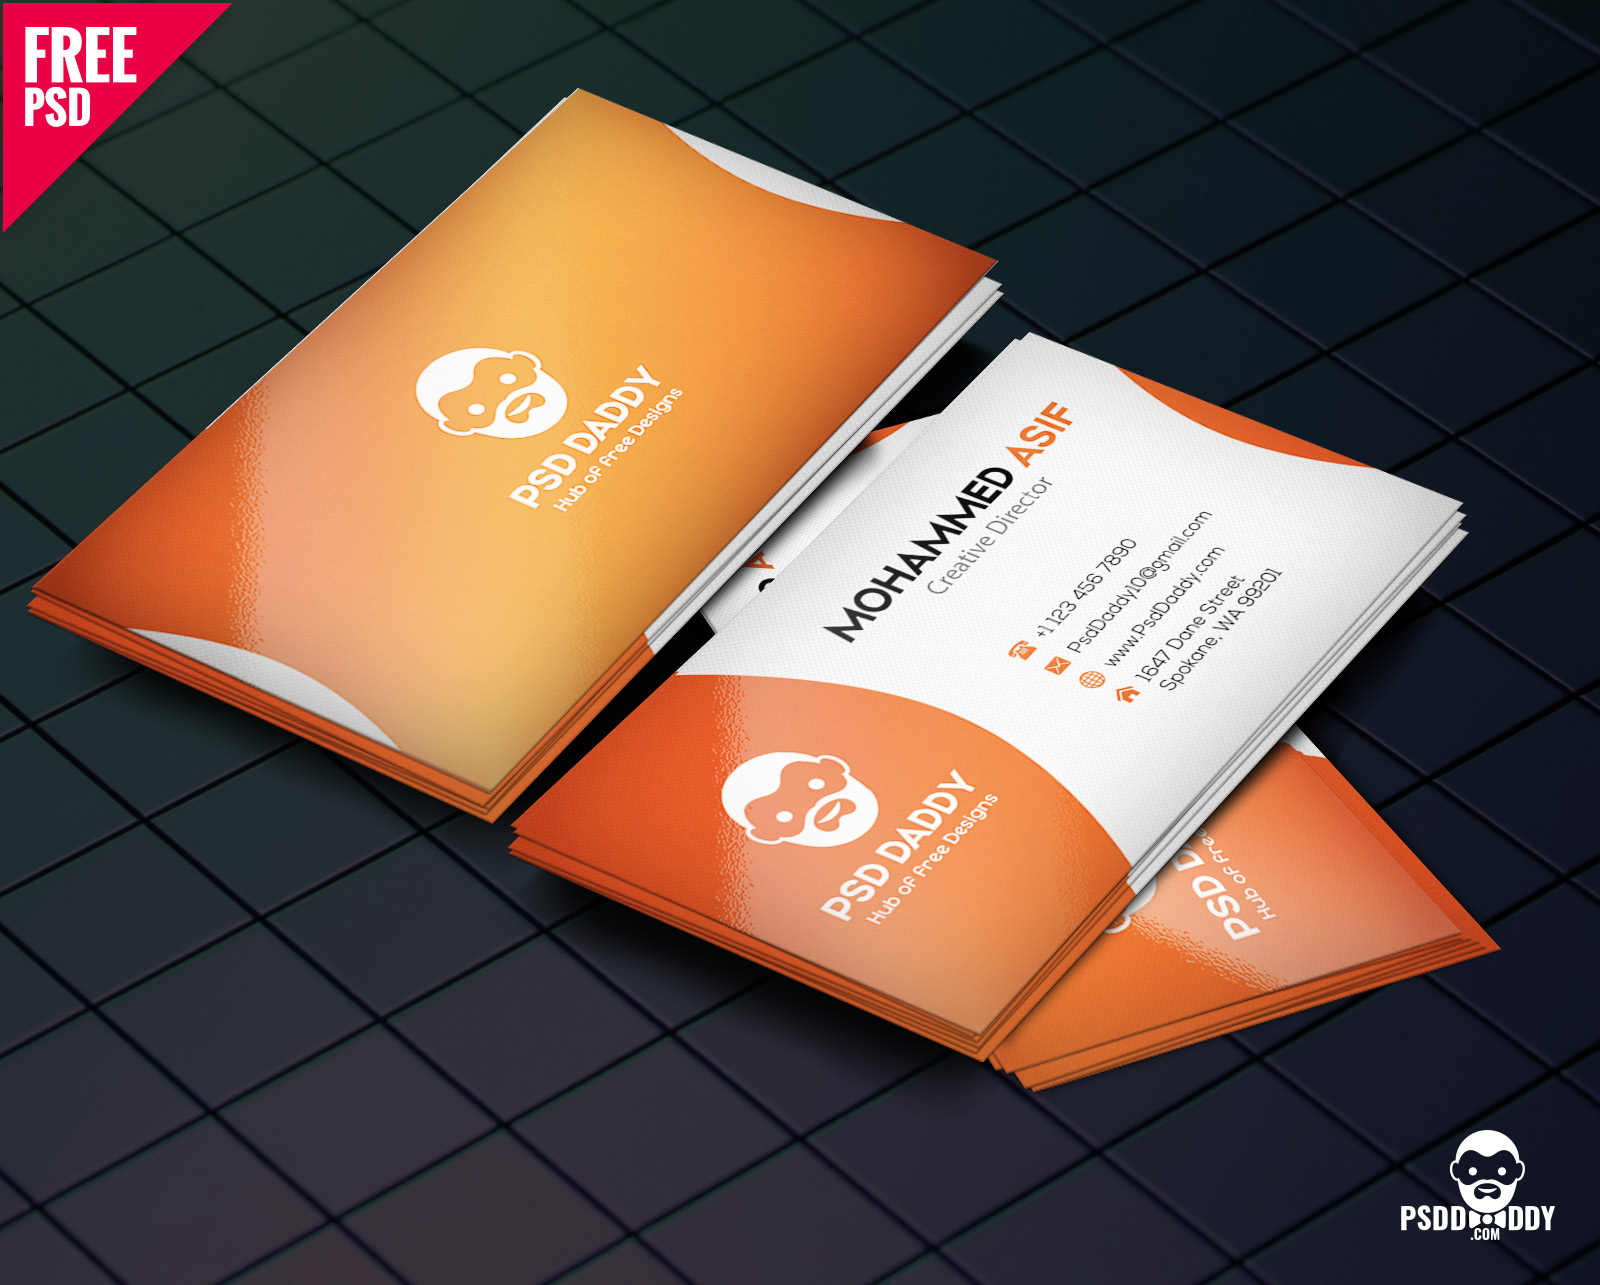 Download] Business Card Design Psd Free | Psddaddy With Regard To Free Psd Visiting Card Templates Download